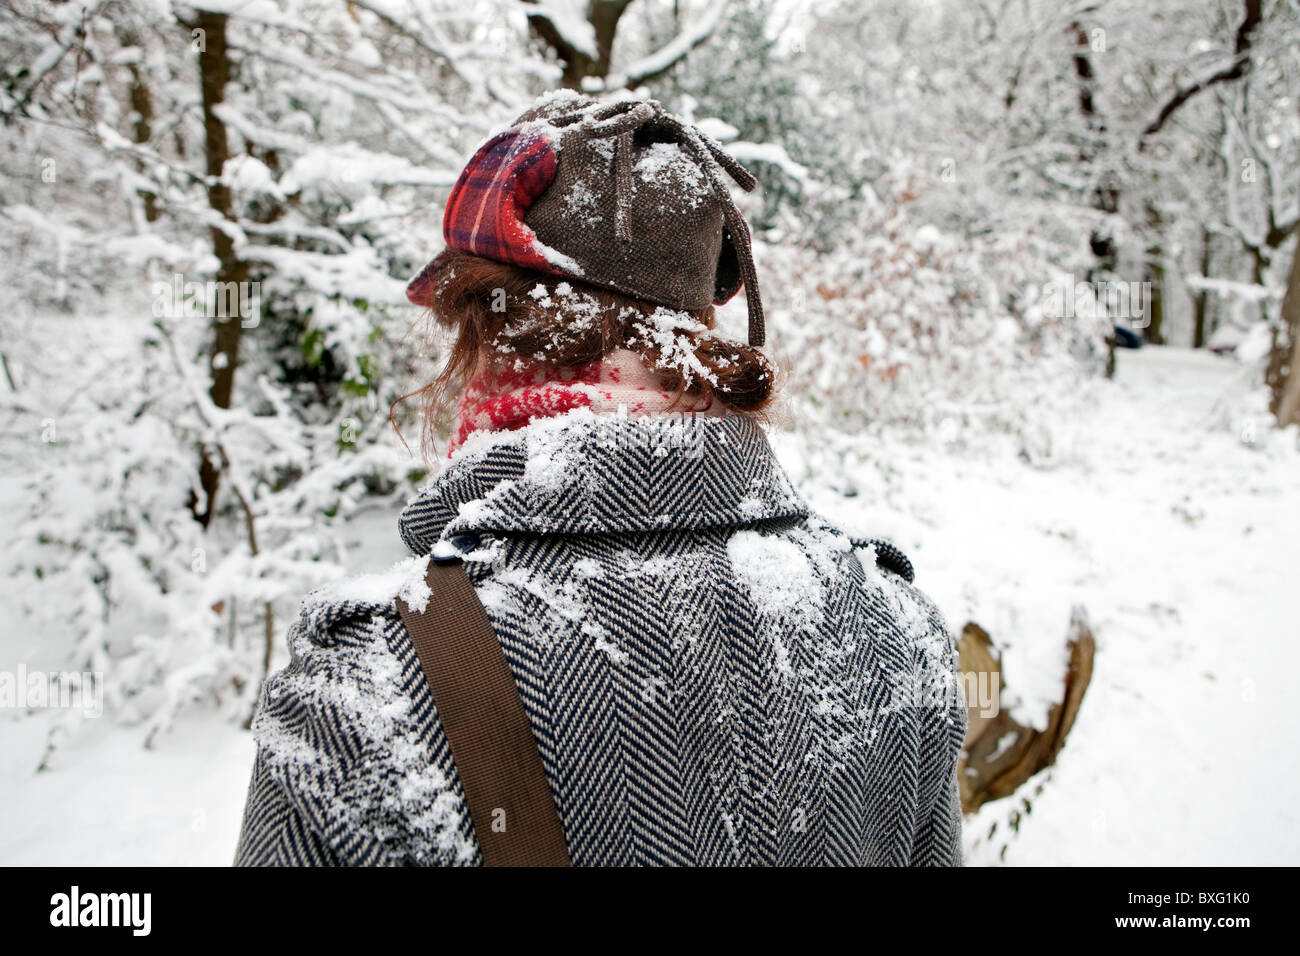 Rear view of woman walking in snowy landscape covered in snow. Stock Photo